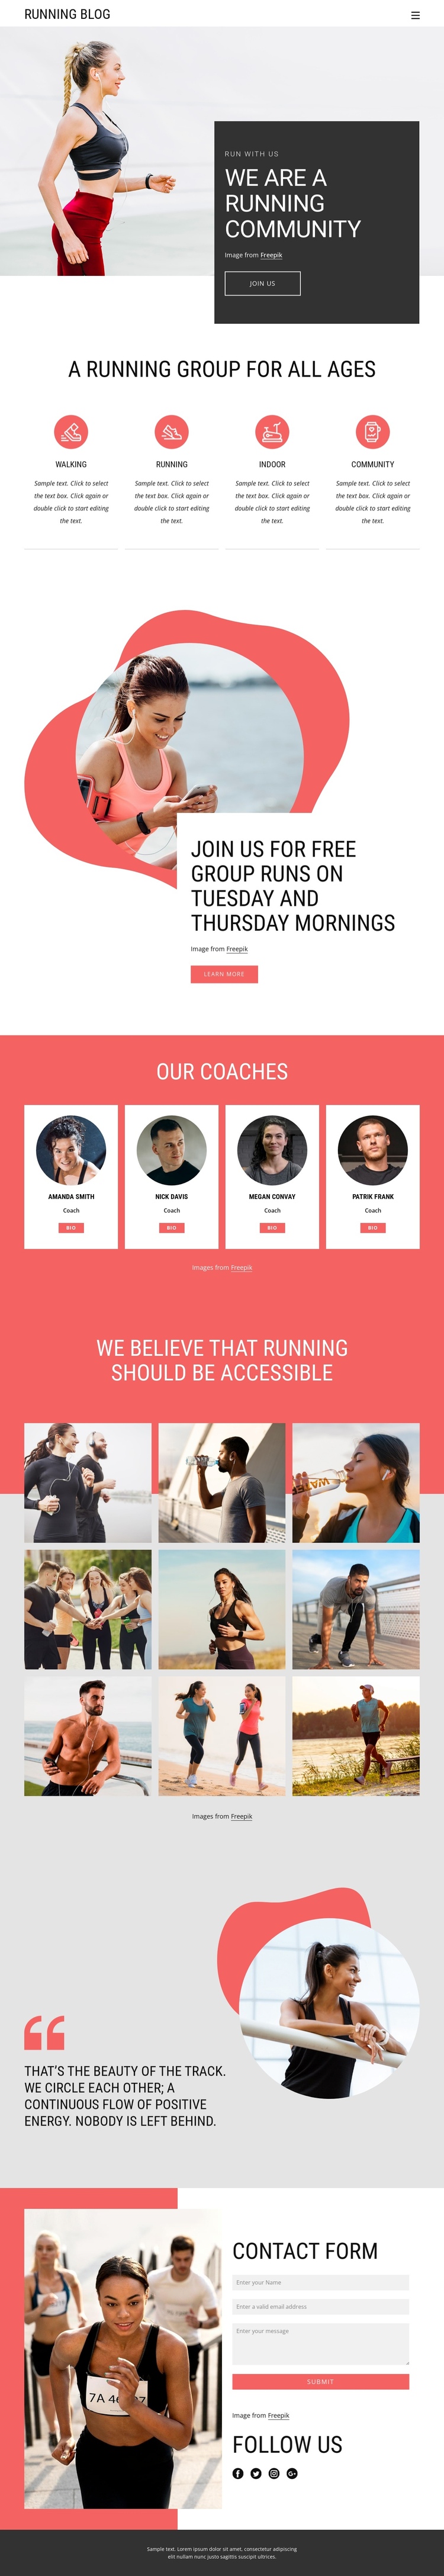 The Benefits of joining a run club Website Builder Software